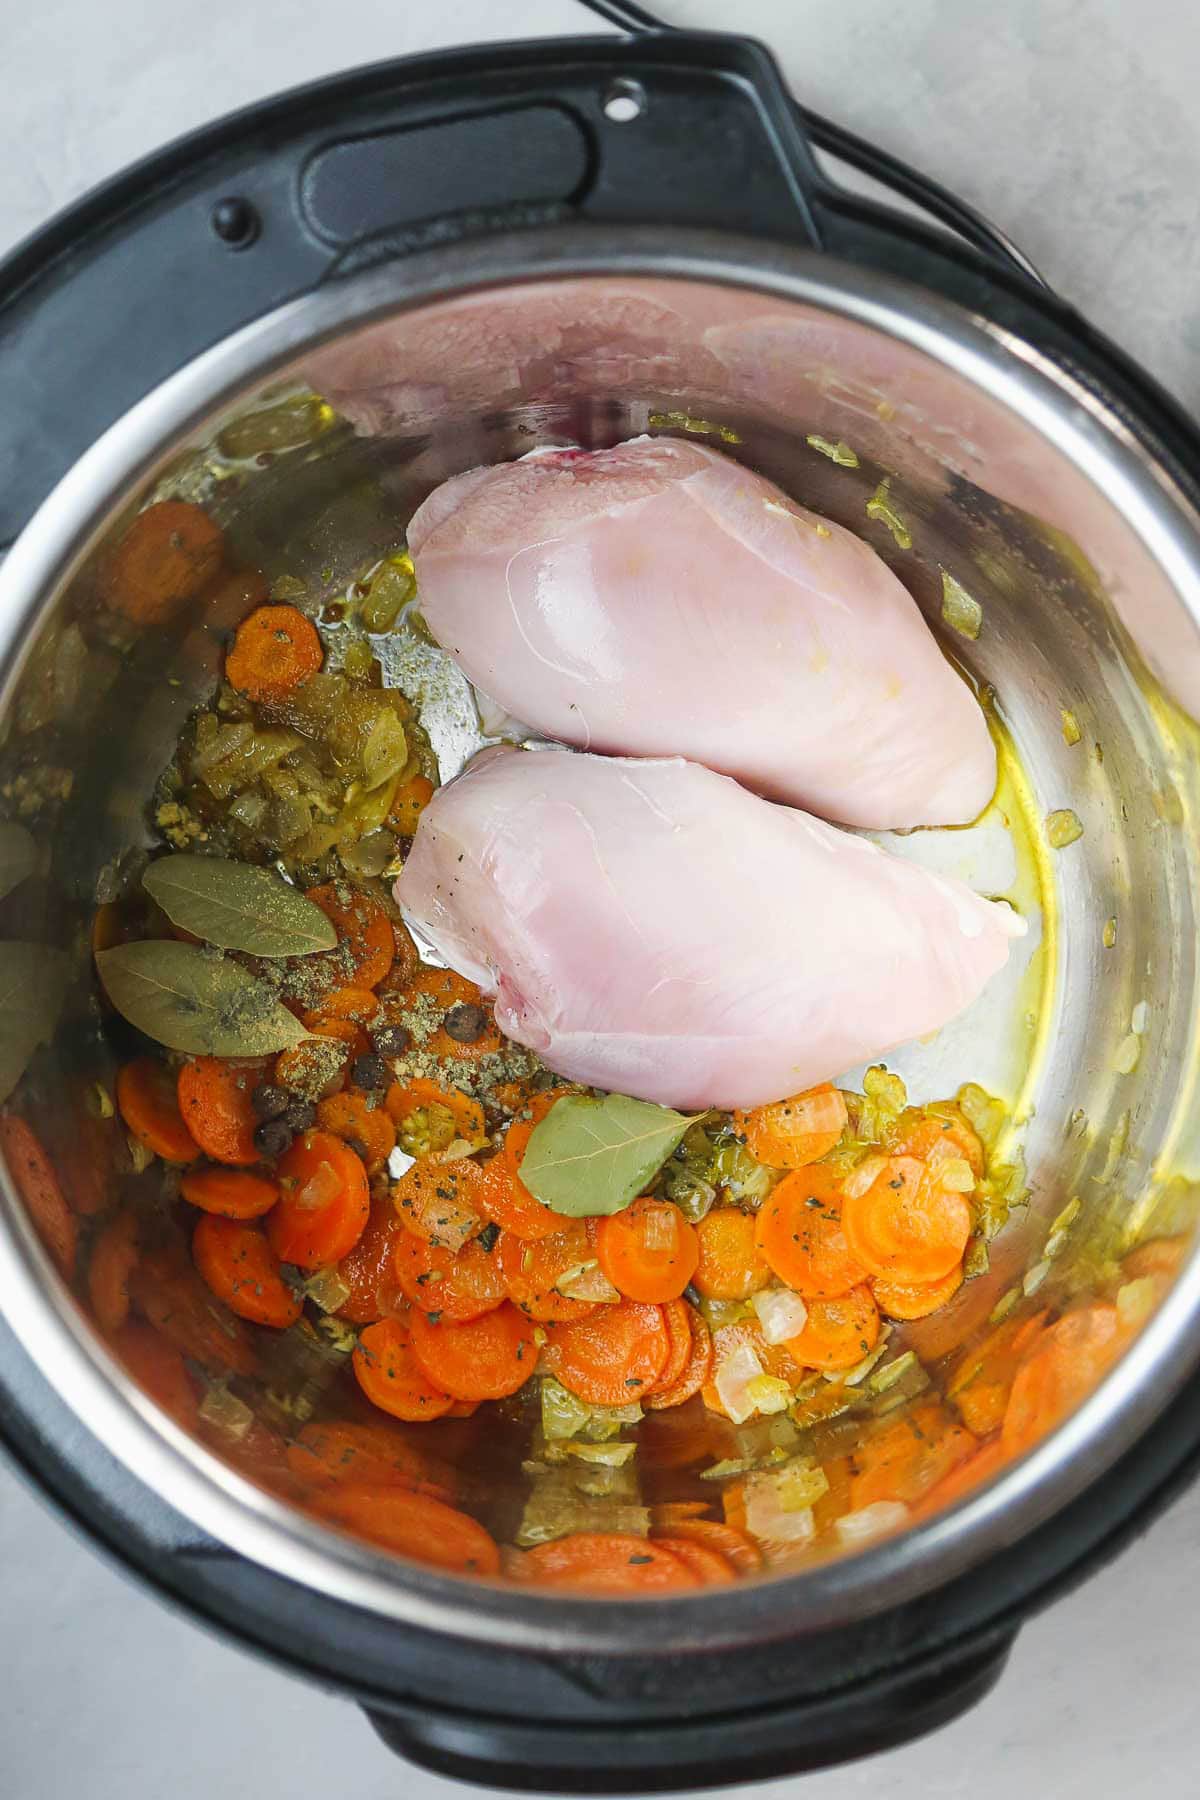 An Instant Pot with the ingredients being cooked